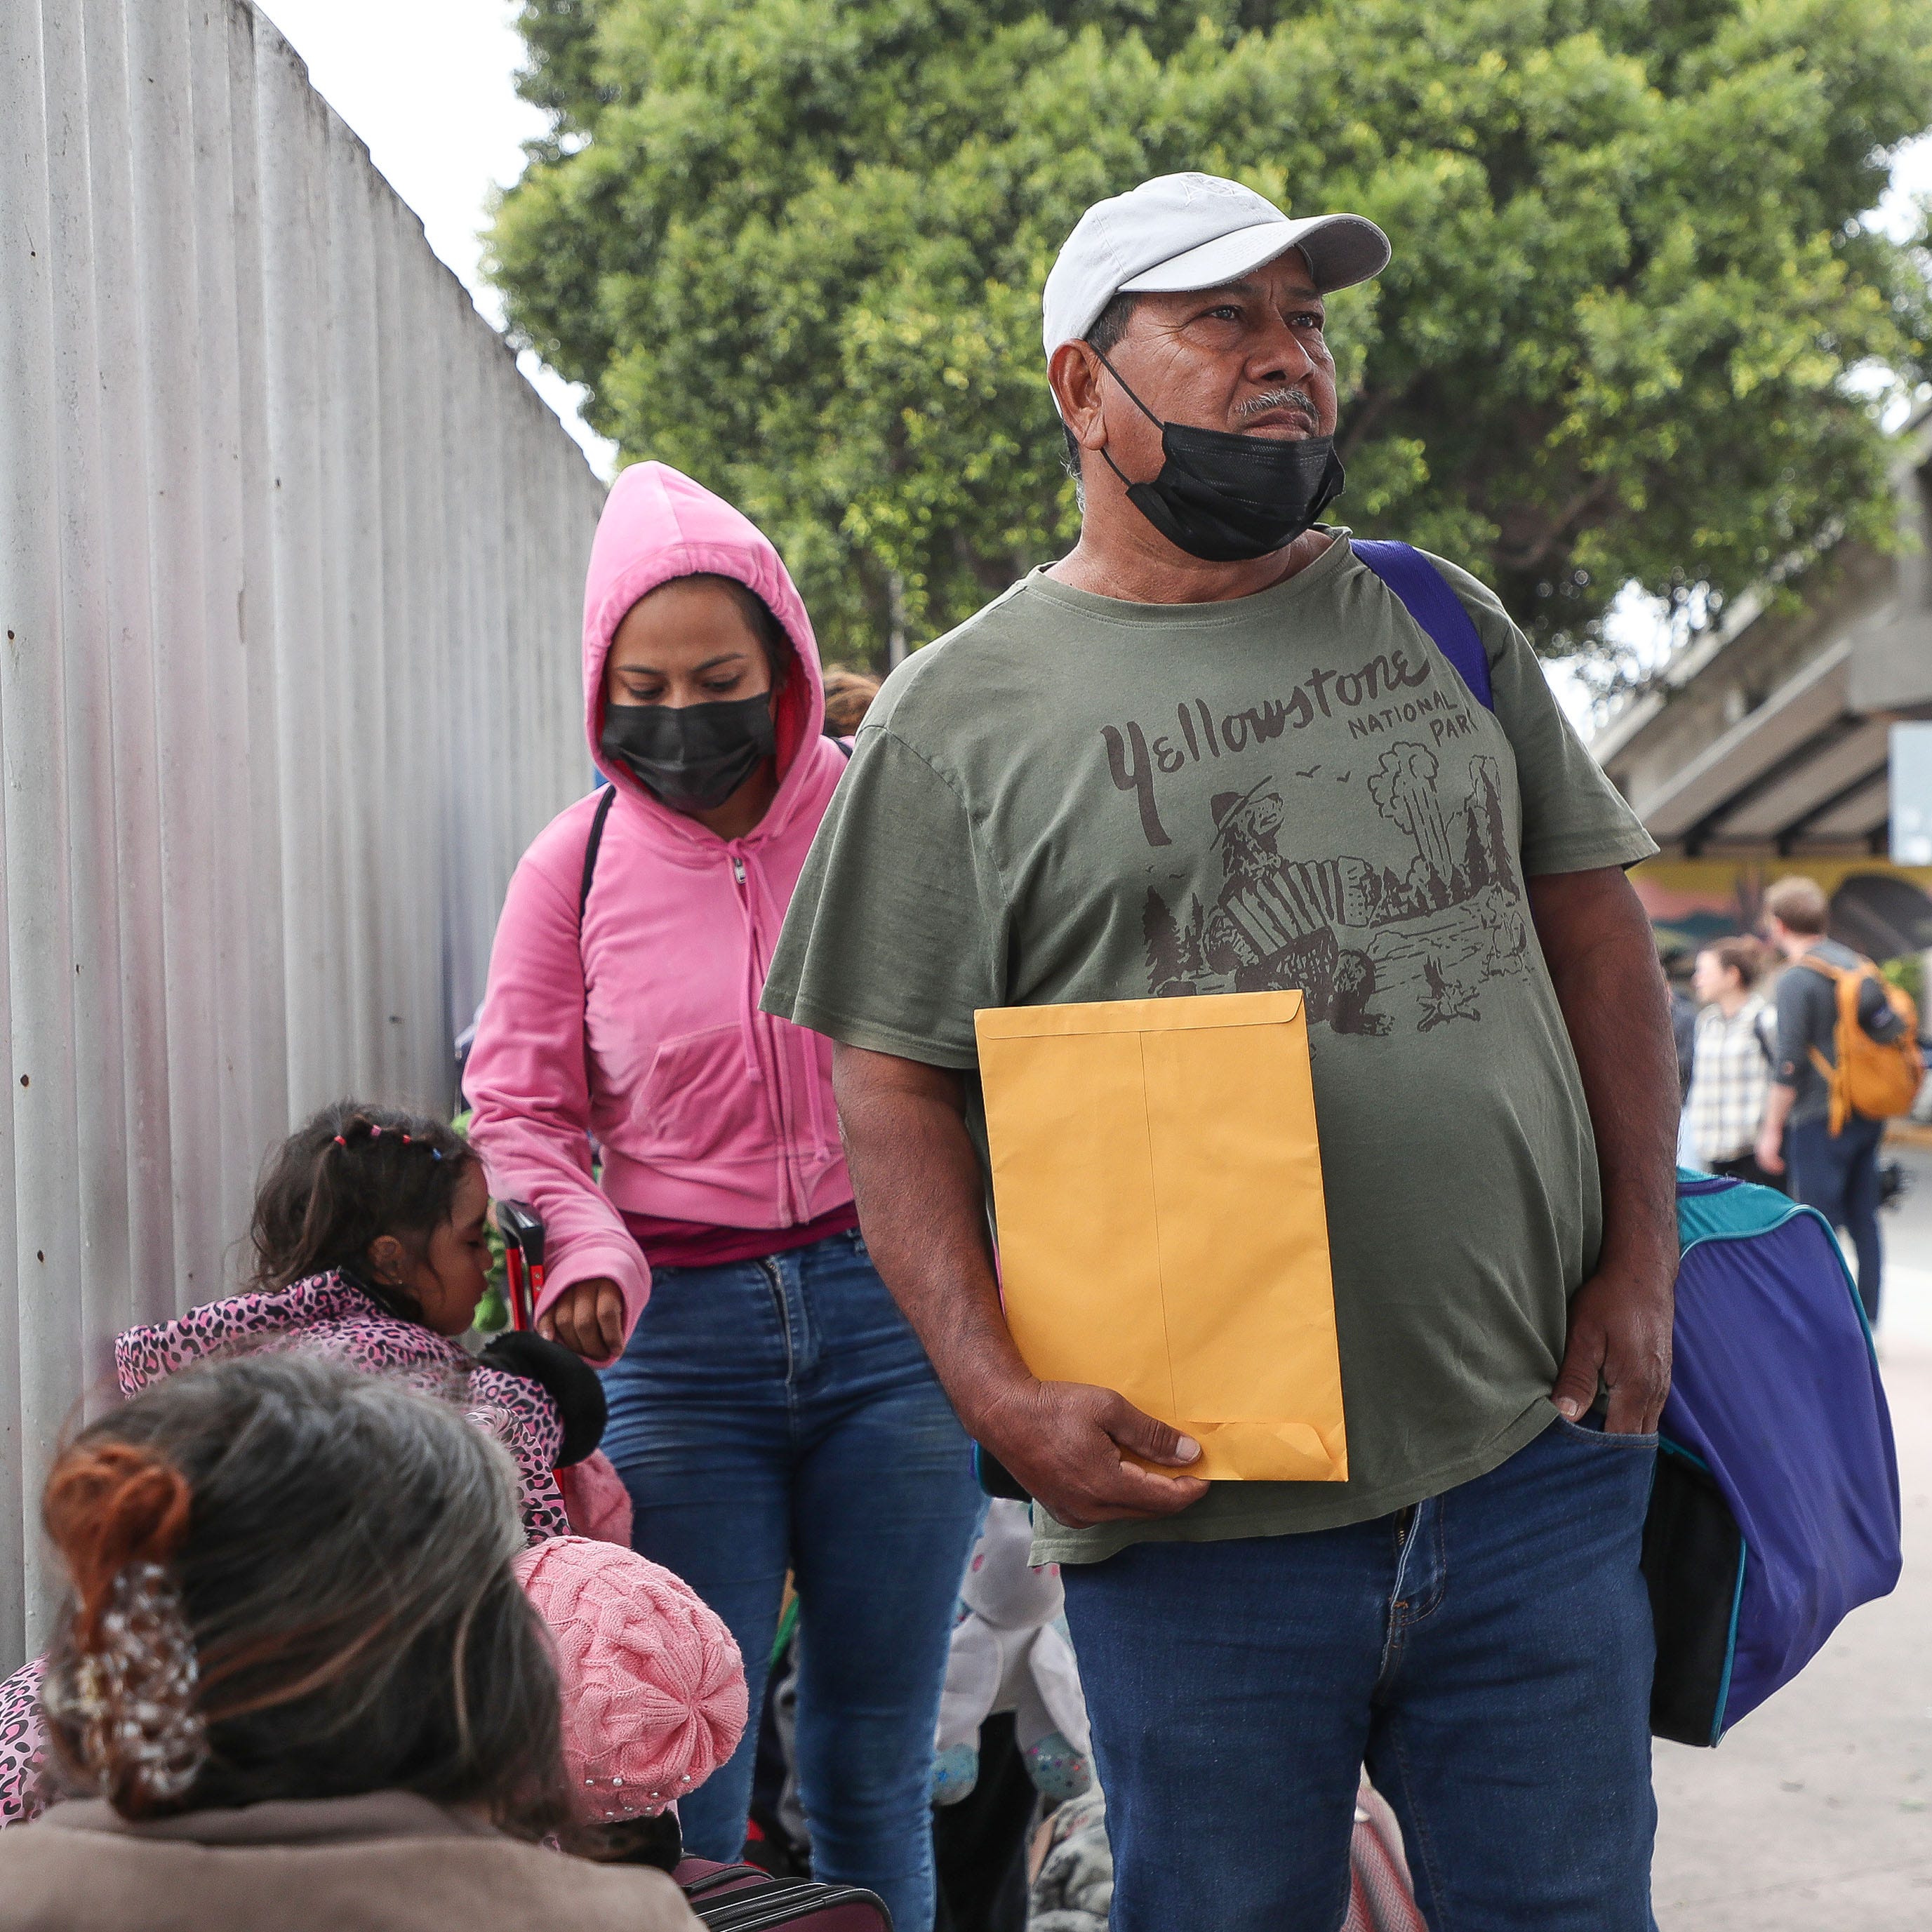 Amador Diaz, right, from Guerreo, Mexico waits with his family to be processed at the El Chapparel Port of Entry in Tijuana, Mexico, May 12, 2023.